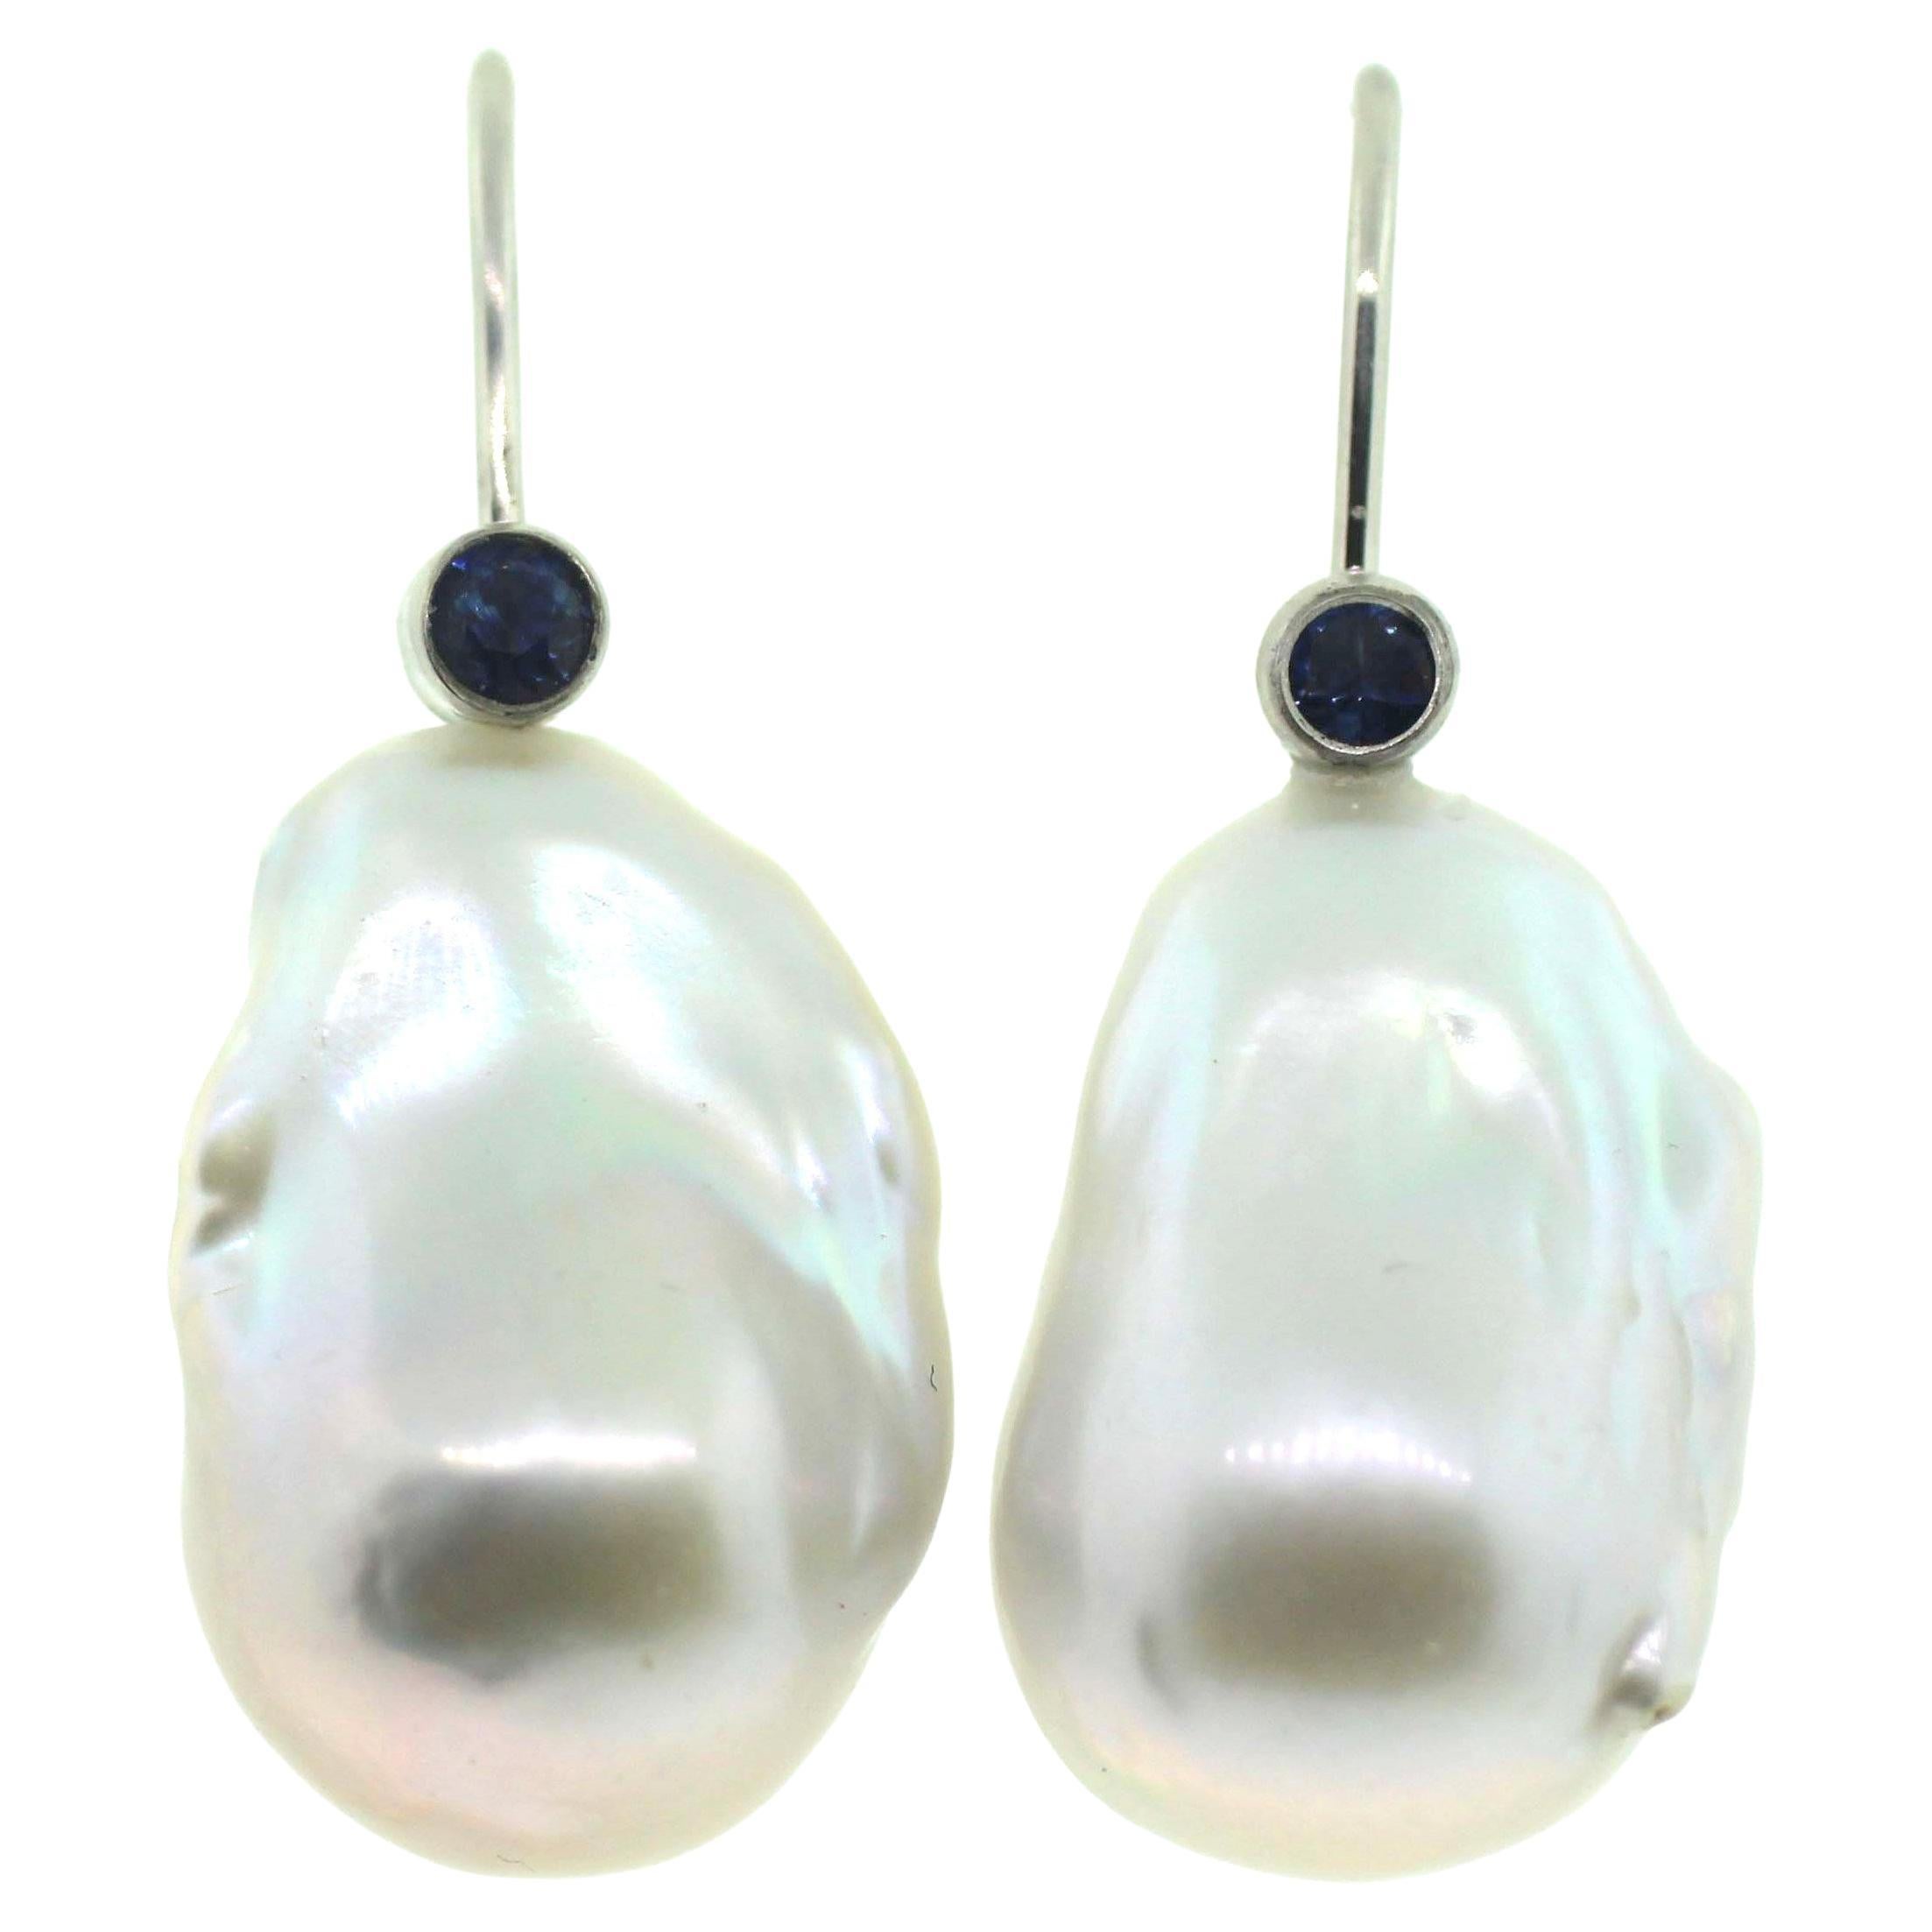 Hakimoto 18k White Gold 22x15 mm White Baroque Pearl Earrings with Blue Sapphire